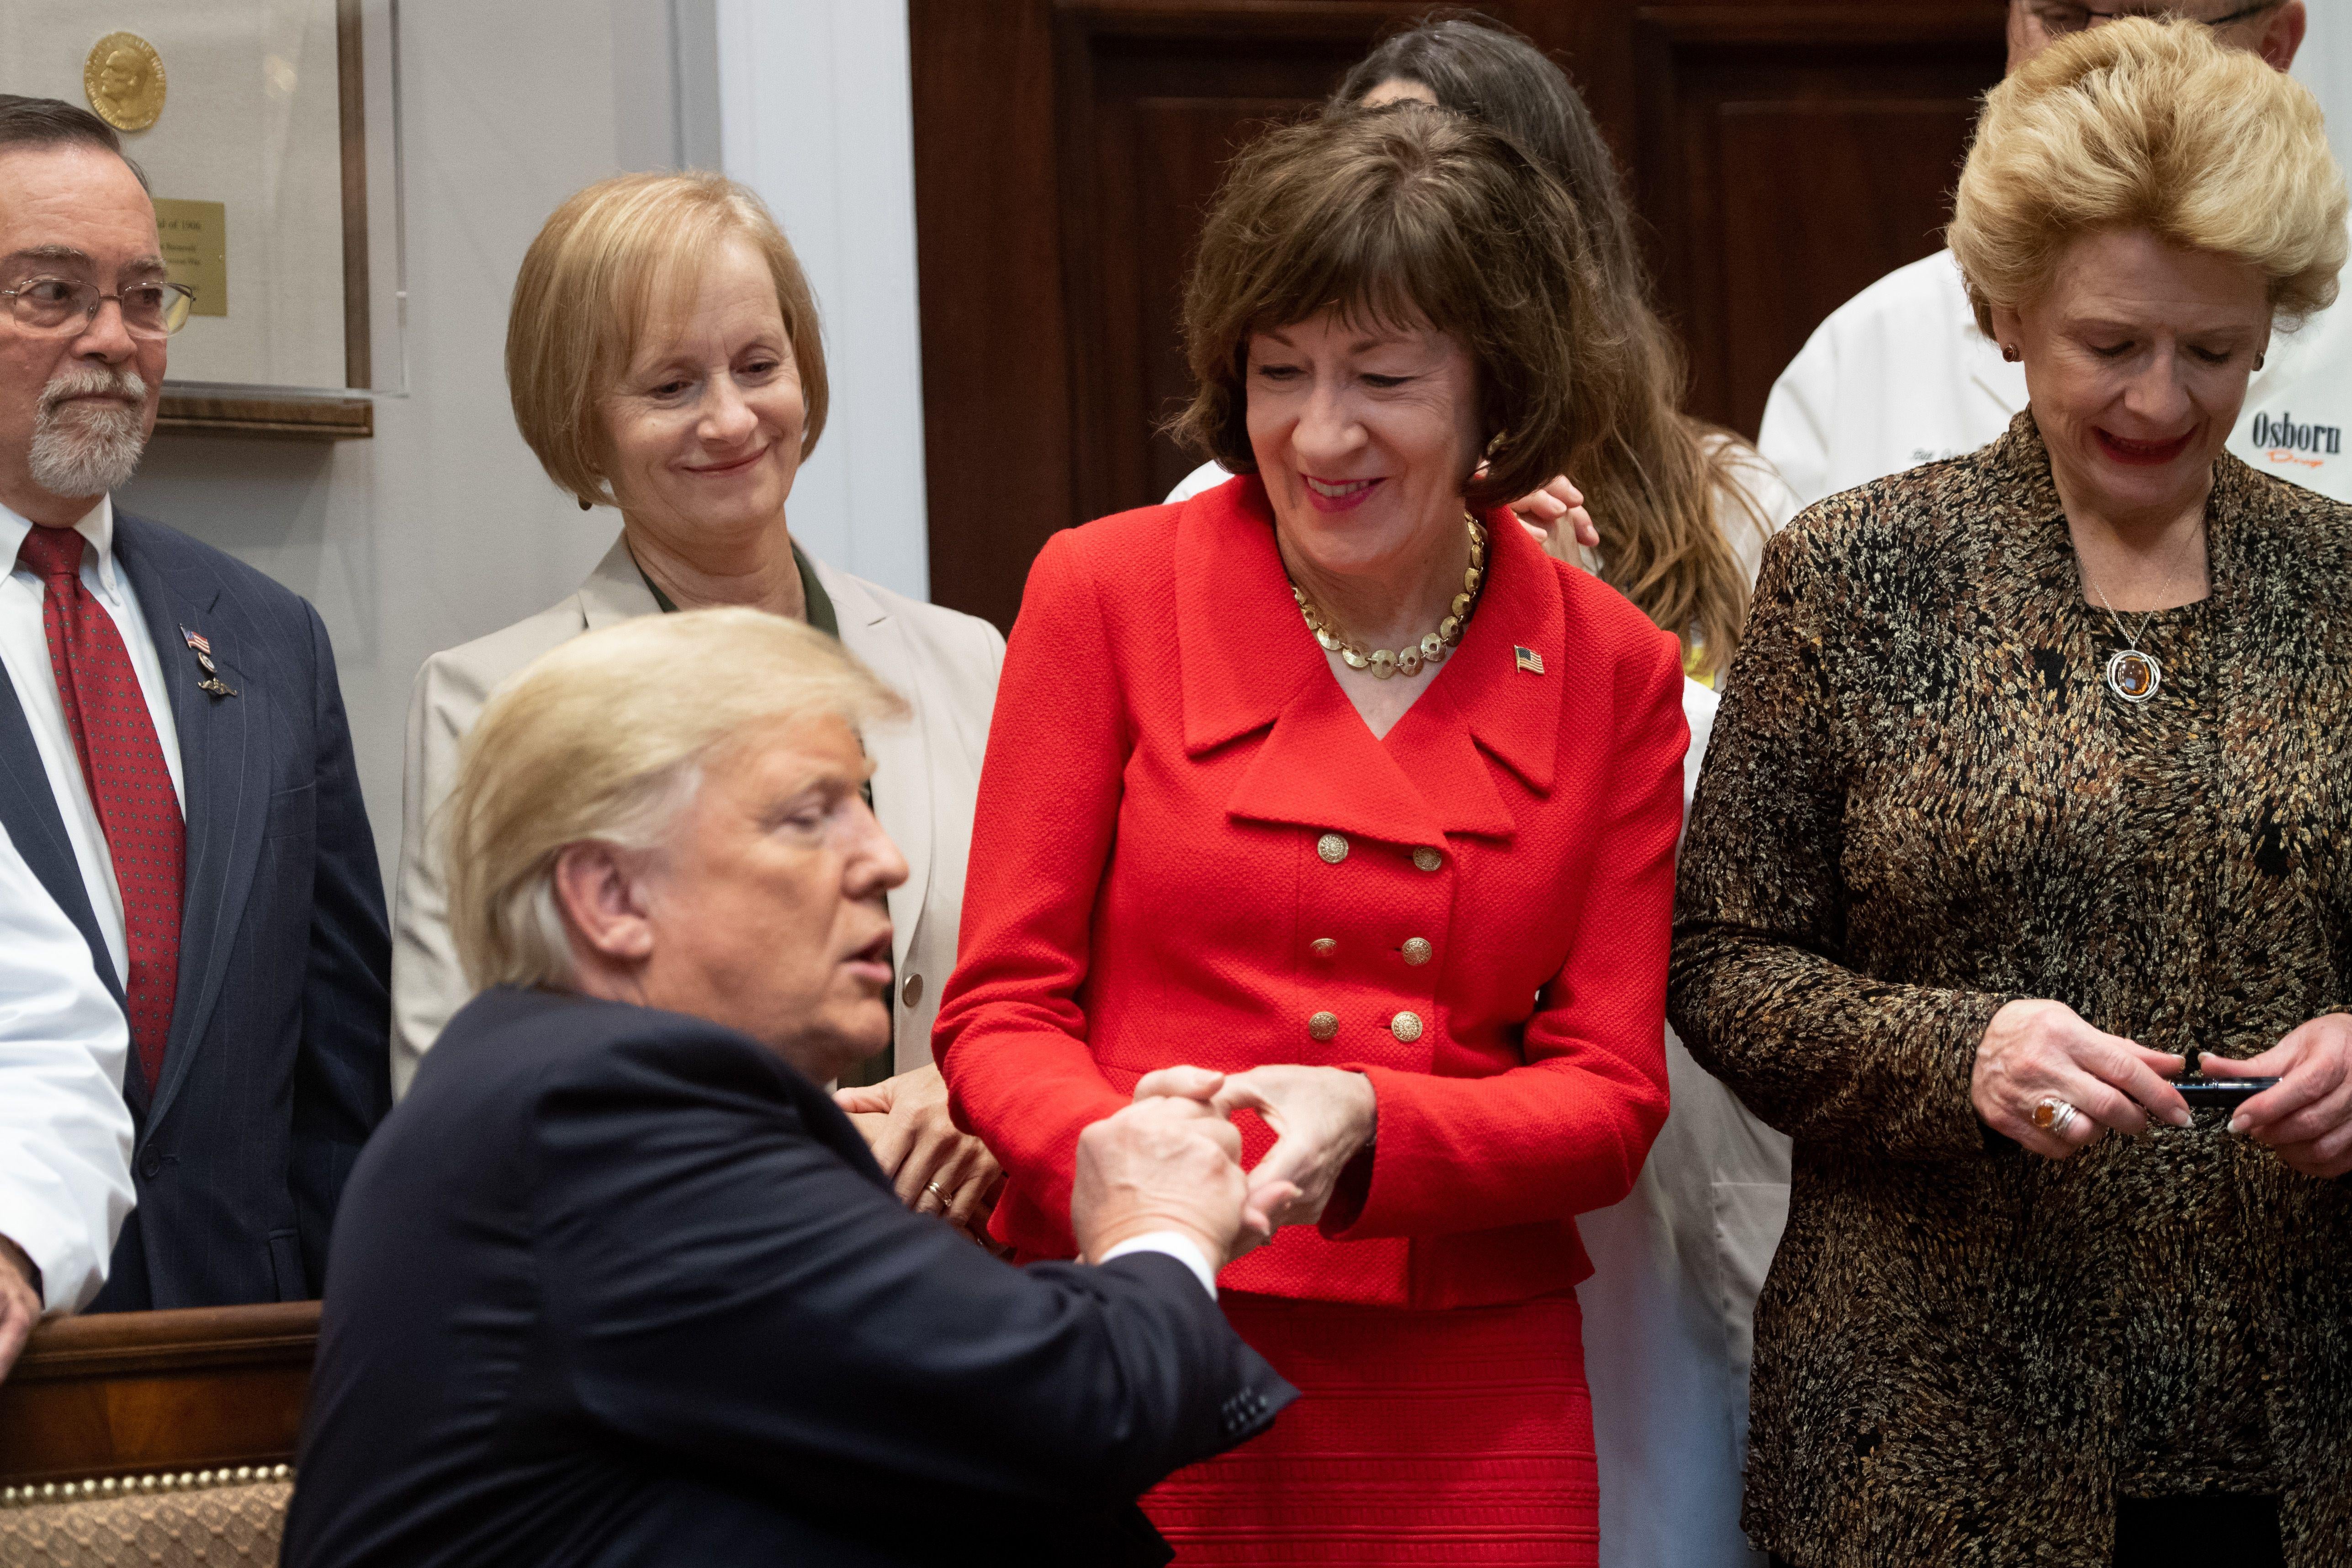 President Donald Trump presents Maine Sen. Susan Collins with a pen after signing bills intended to lower prescription drug prices during a ceremony on Oct. 10, 2018, in Washington.